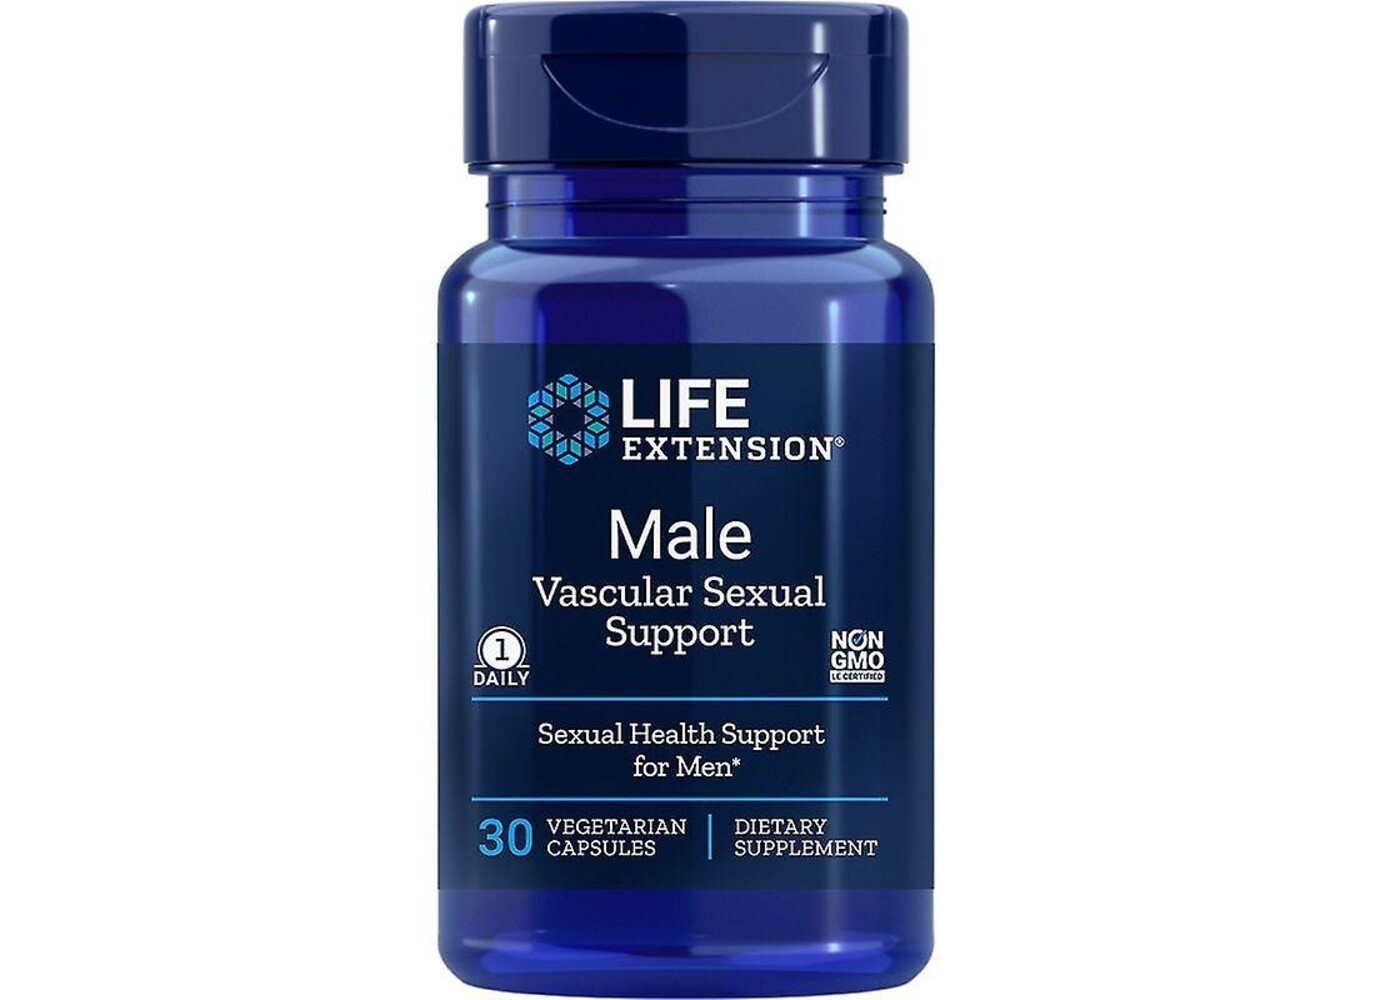 Life Extension Male Vascular Sexual Support, 30 vegetarian capsules